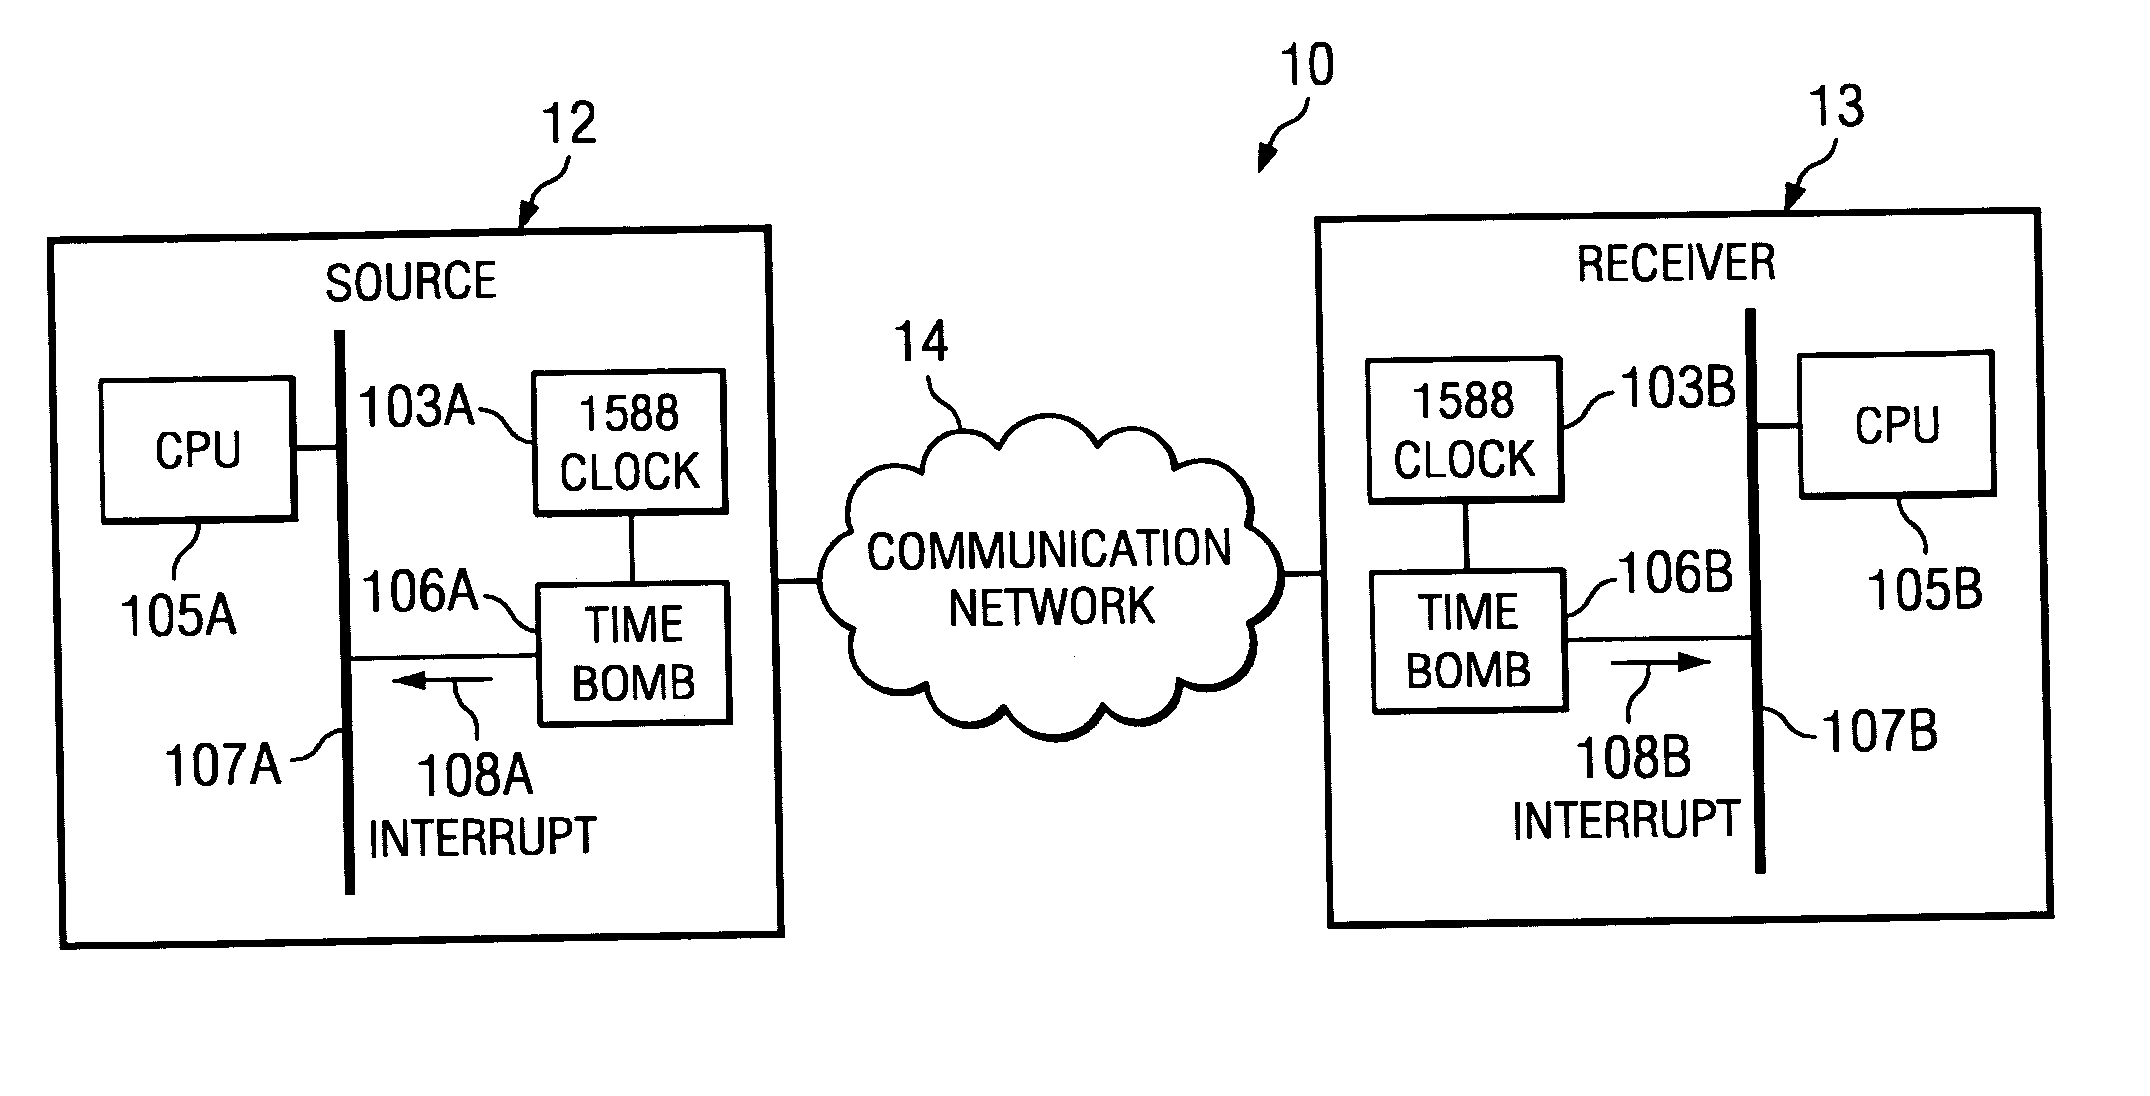 System and method for coordinating the actions of a plurality of devices via scheduling the actions based on synchronized local clocks